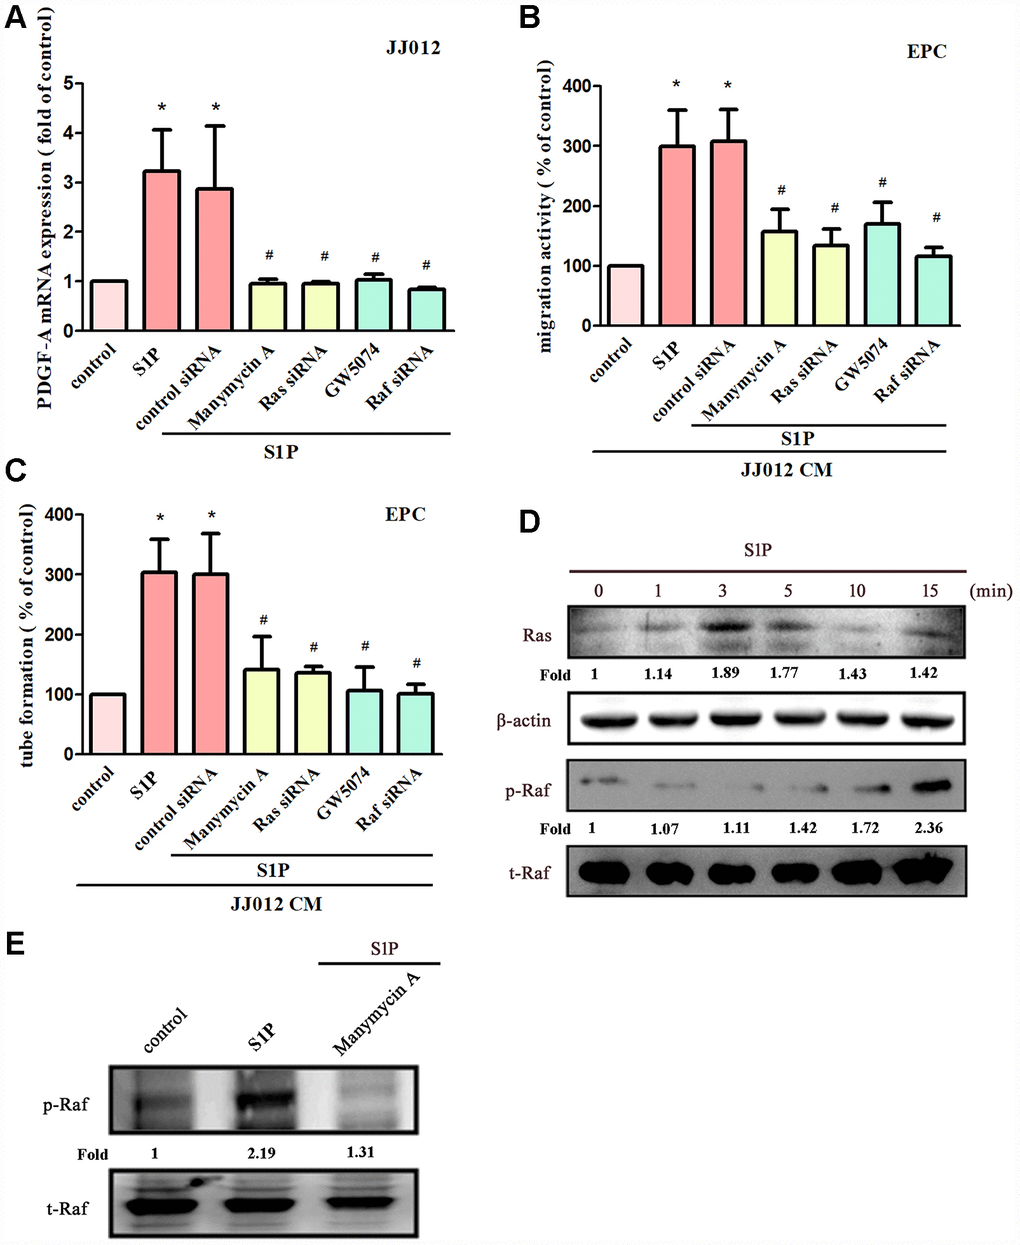 The Ras and Raf pathways mediate S1P-promoted PDGF-A expression and angiogenesis. (A) Cells were pretreated for 30 min with manumycin A (10 μM) and GW5074 (10 μM), or transfected with Ras and Raf siRNAs then stimulated with S1P (10 μM). PDGF-A expression was examined by qPCR assays (n=5). (B, C) The CM was applied to EPCs and analyses assessed migratory and tube formation activity (n=4). (D) JJ012 cells were incubated with S1P; Ras and Raf activity was examined by Western blot assay (n=3). (E) JJ012 cells were pretreated with manumycin A for 30 min, then stimulated with S1P and Raf phosphorylation was examined (n=3). Results are expressed as the mean ± SEM. *p p 